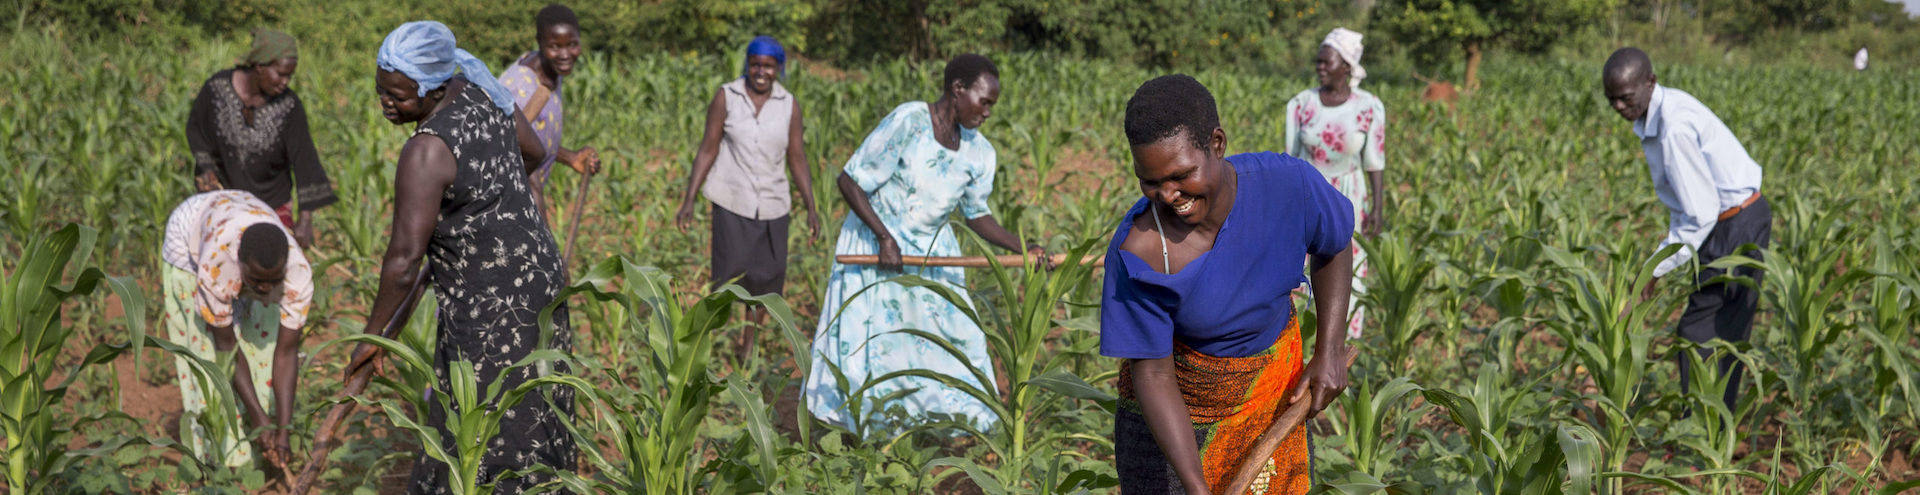 Women from the Self Help Group Alita Kole, taking care of their crops that they own together as a group. This gardening activity is part of an income generating activity supported by Reproductive Health Uganda and enables them to have financial independence and provide for their family needs.